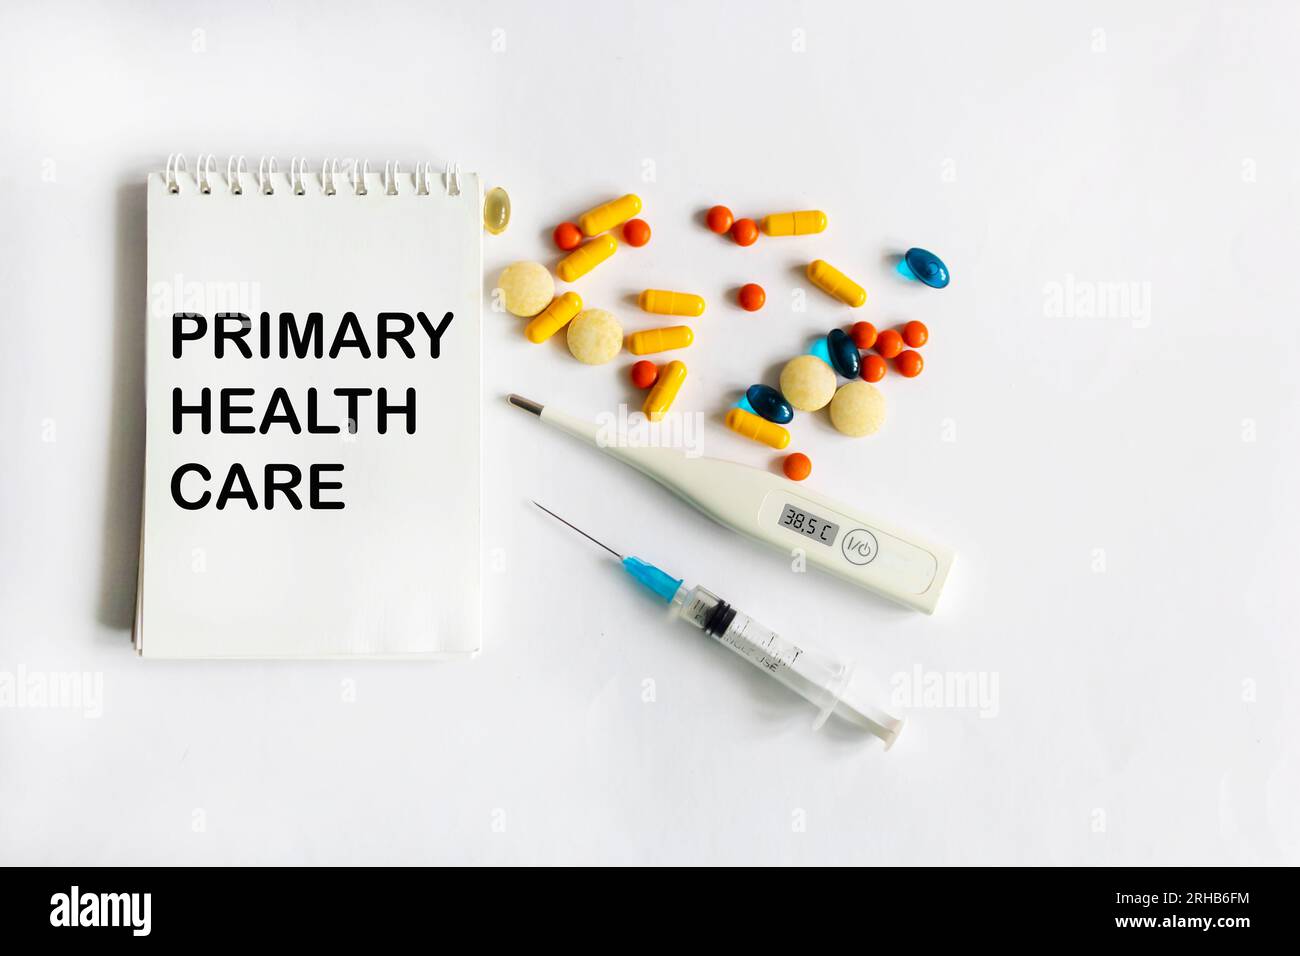 Primary health care is shown using the text Stock Photo